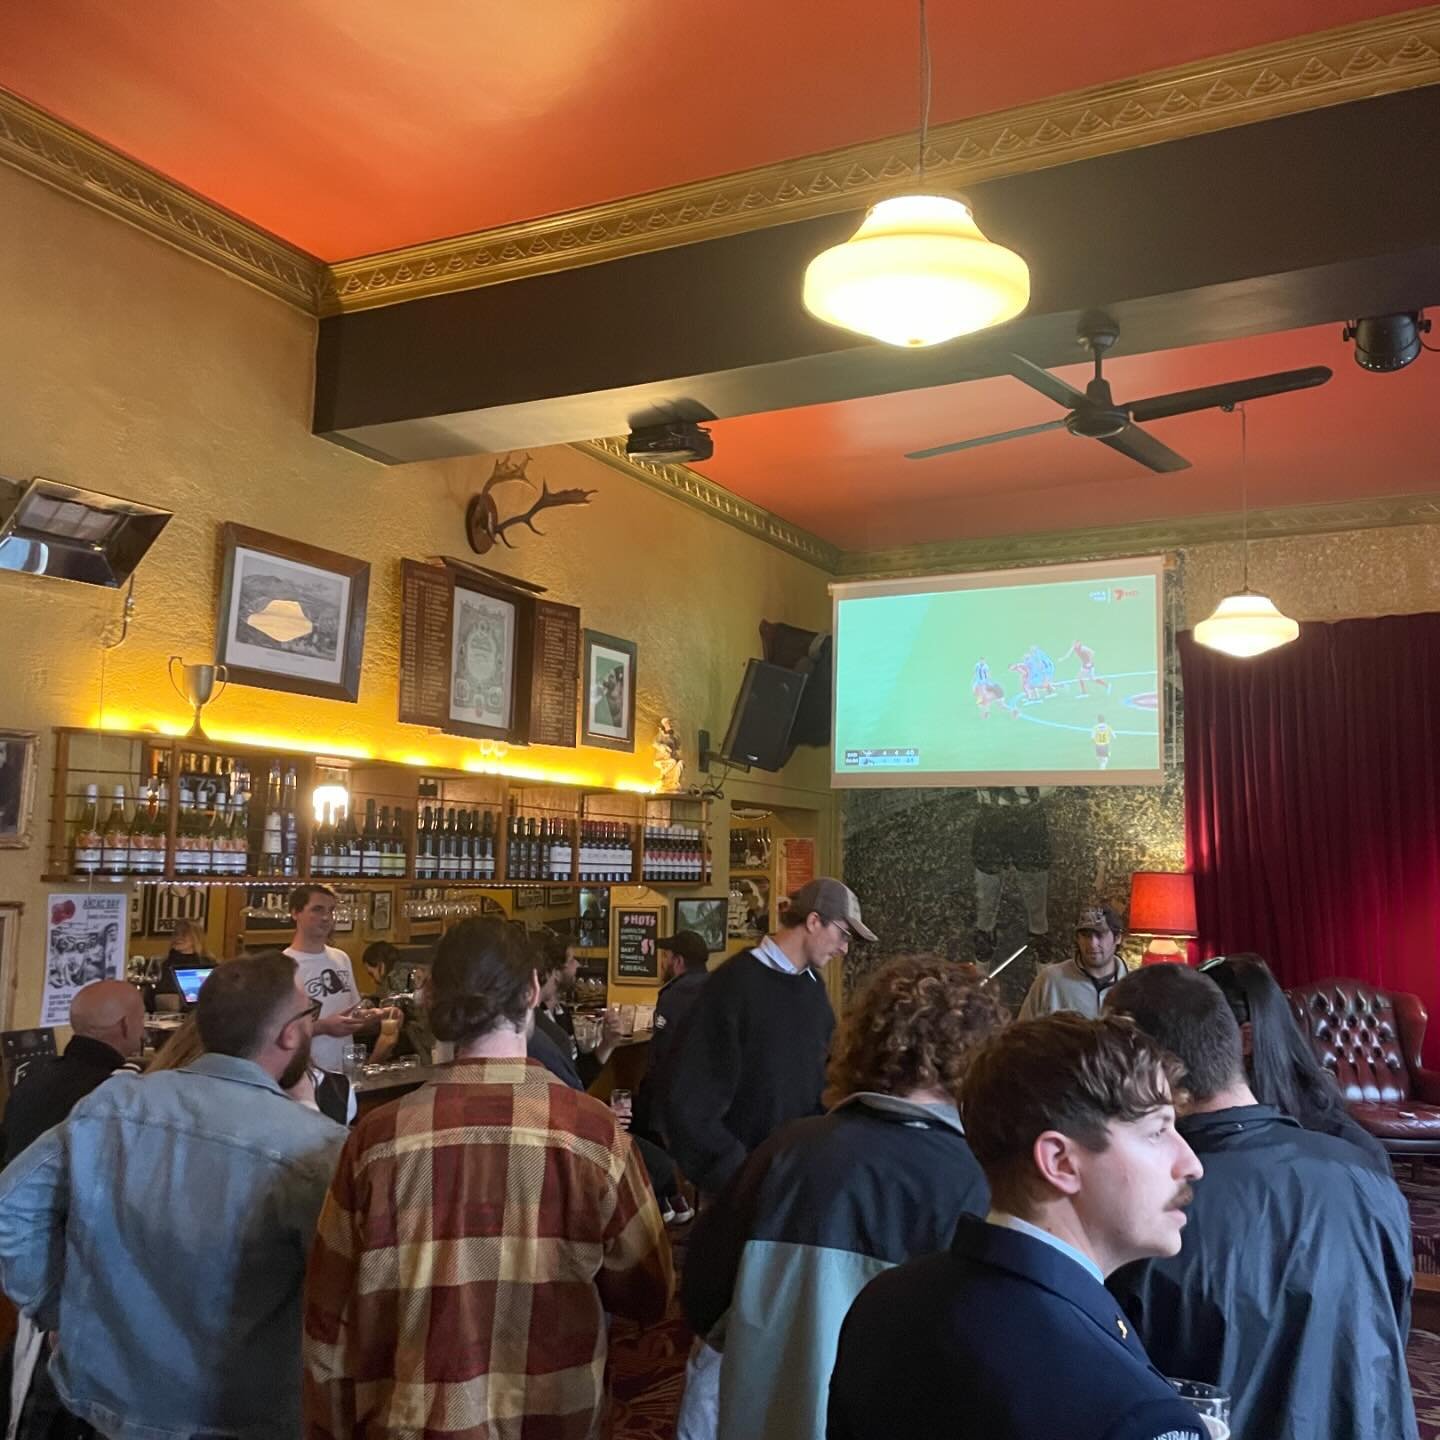 TGIF 🙌🏽 &amp; for tonight&rsquo;s game 🏉 Watch it on the big screen at the front bar or in the back beer garden near the fire.. 🔥
See you in a few 

#melbournefooty #melbournepubs #collingwoodmagpies